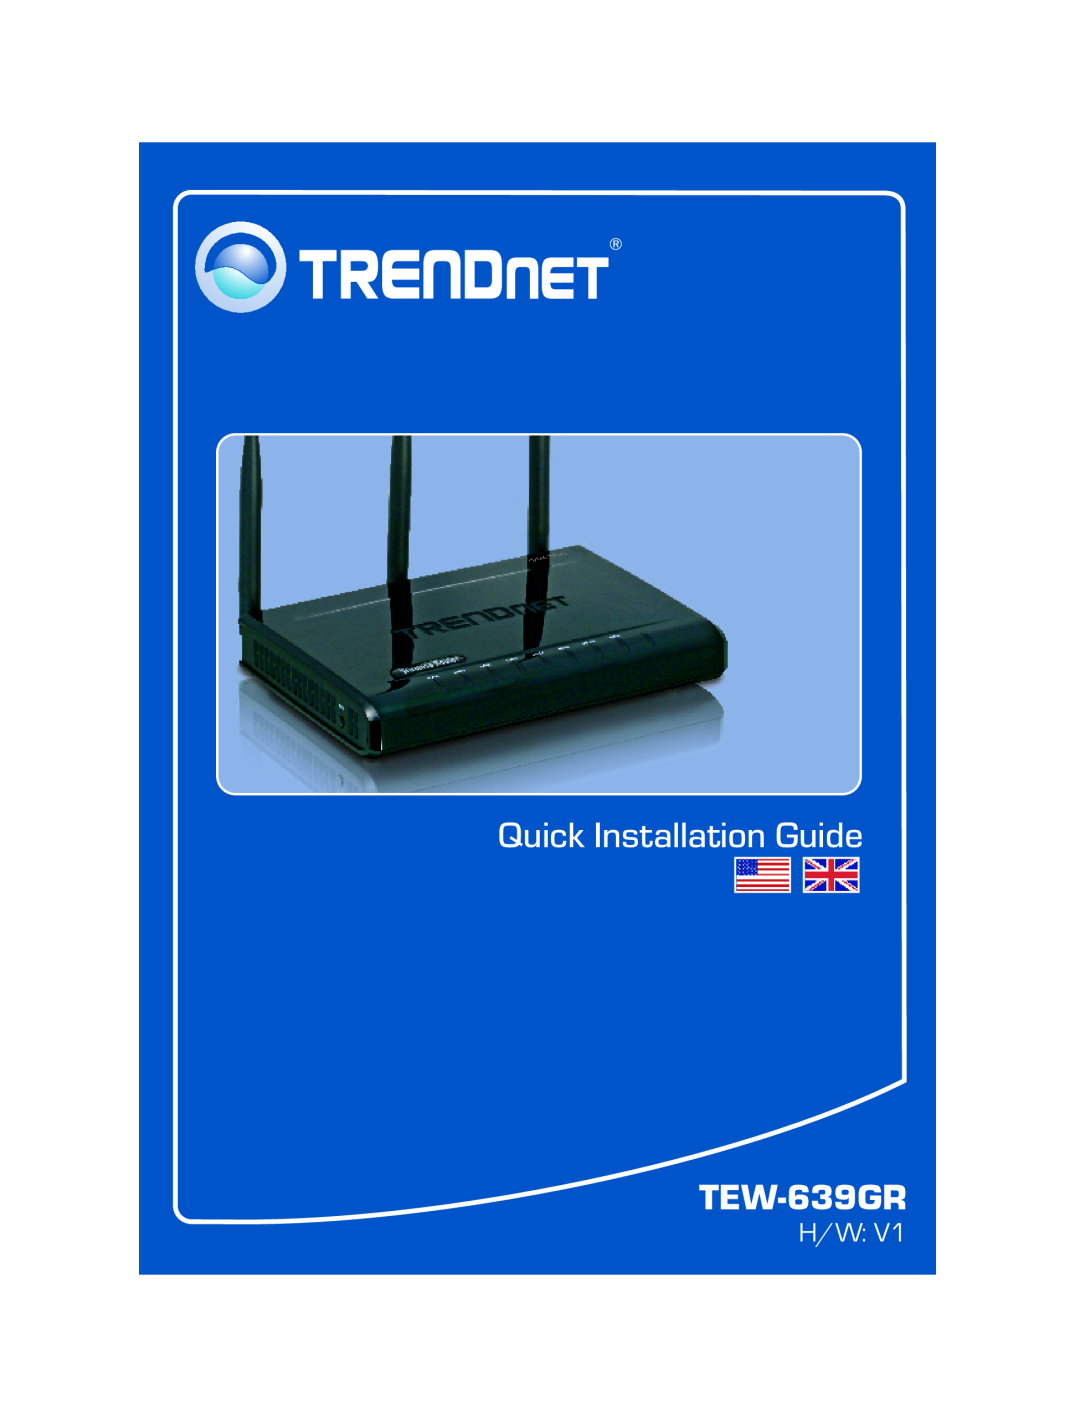 TRENDnet TEW-651BR, Wireless Router manual 2.01, Quick Installation Guide 